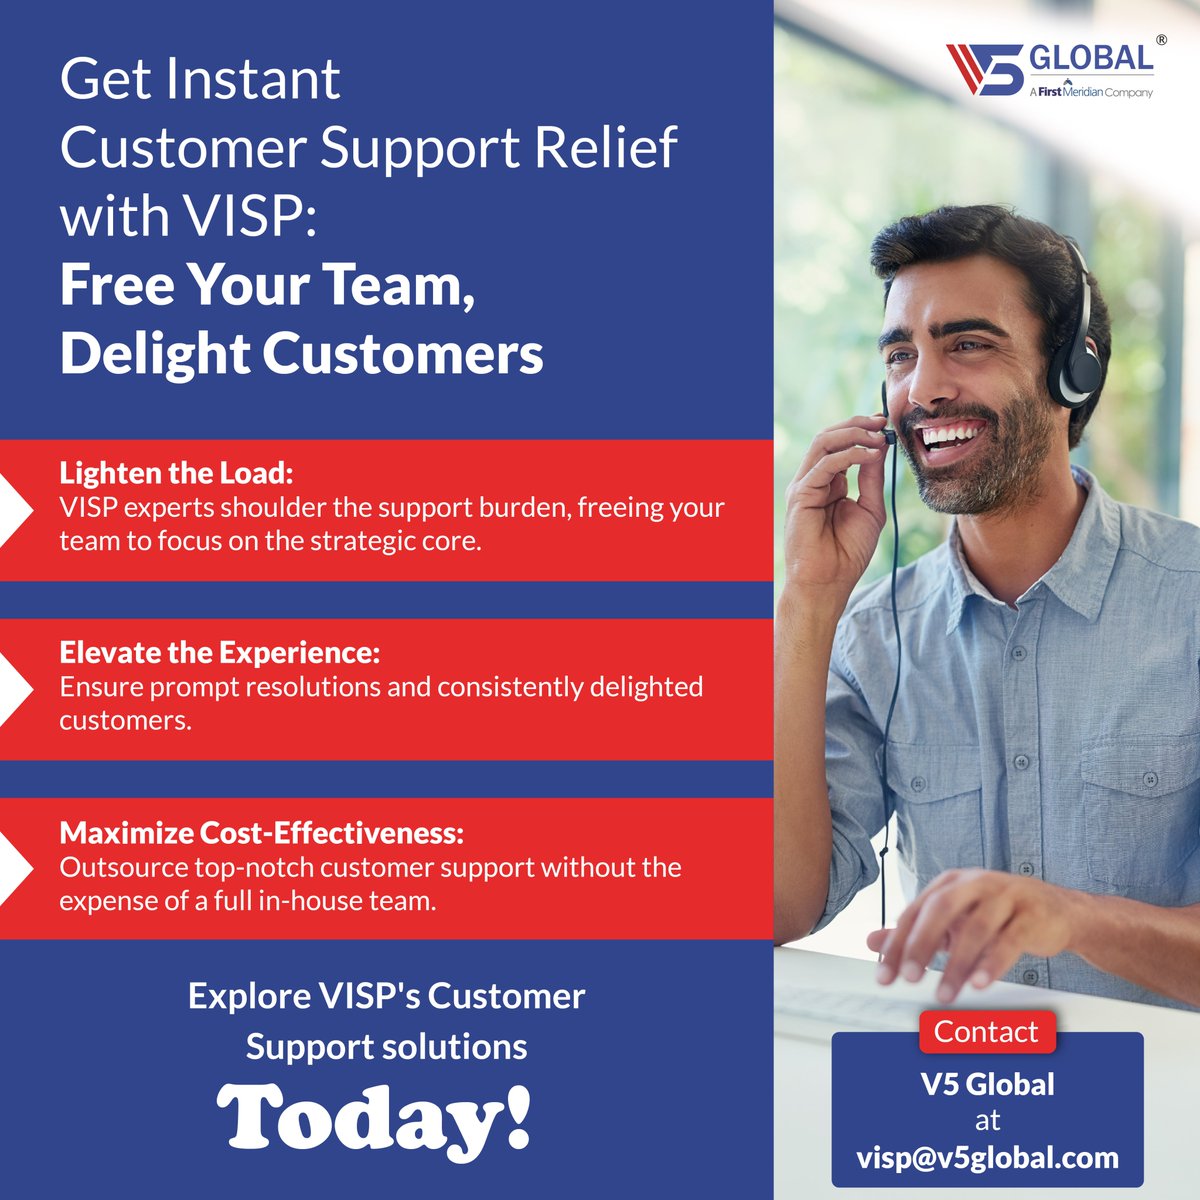 Got too many customer questions?
Our VISP team from V5 Global can handle it all, keeping your customers satisfied. Visit v5global.com to know more.

#visp #CustomerService #VISP #VirtualSupport #OneFM #OneFirstMeridian #v5global